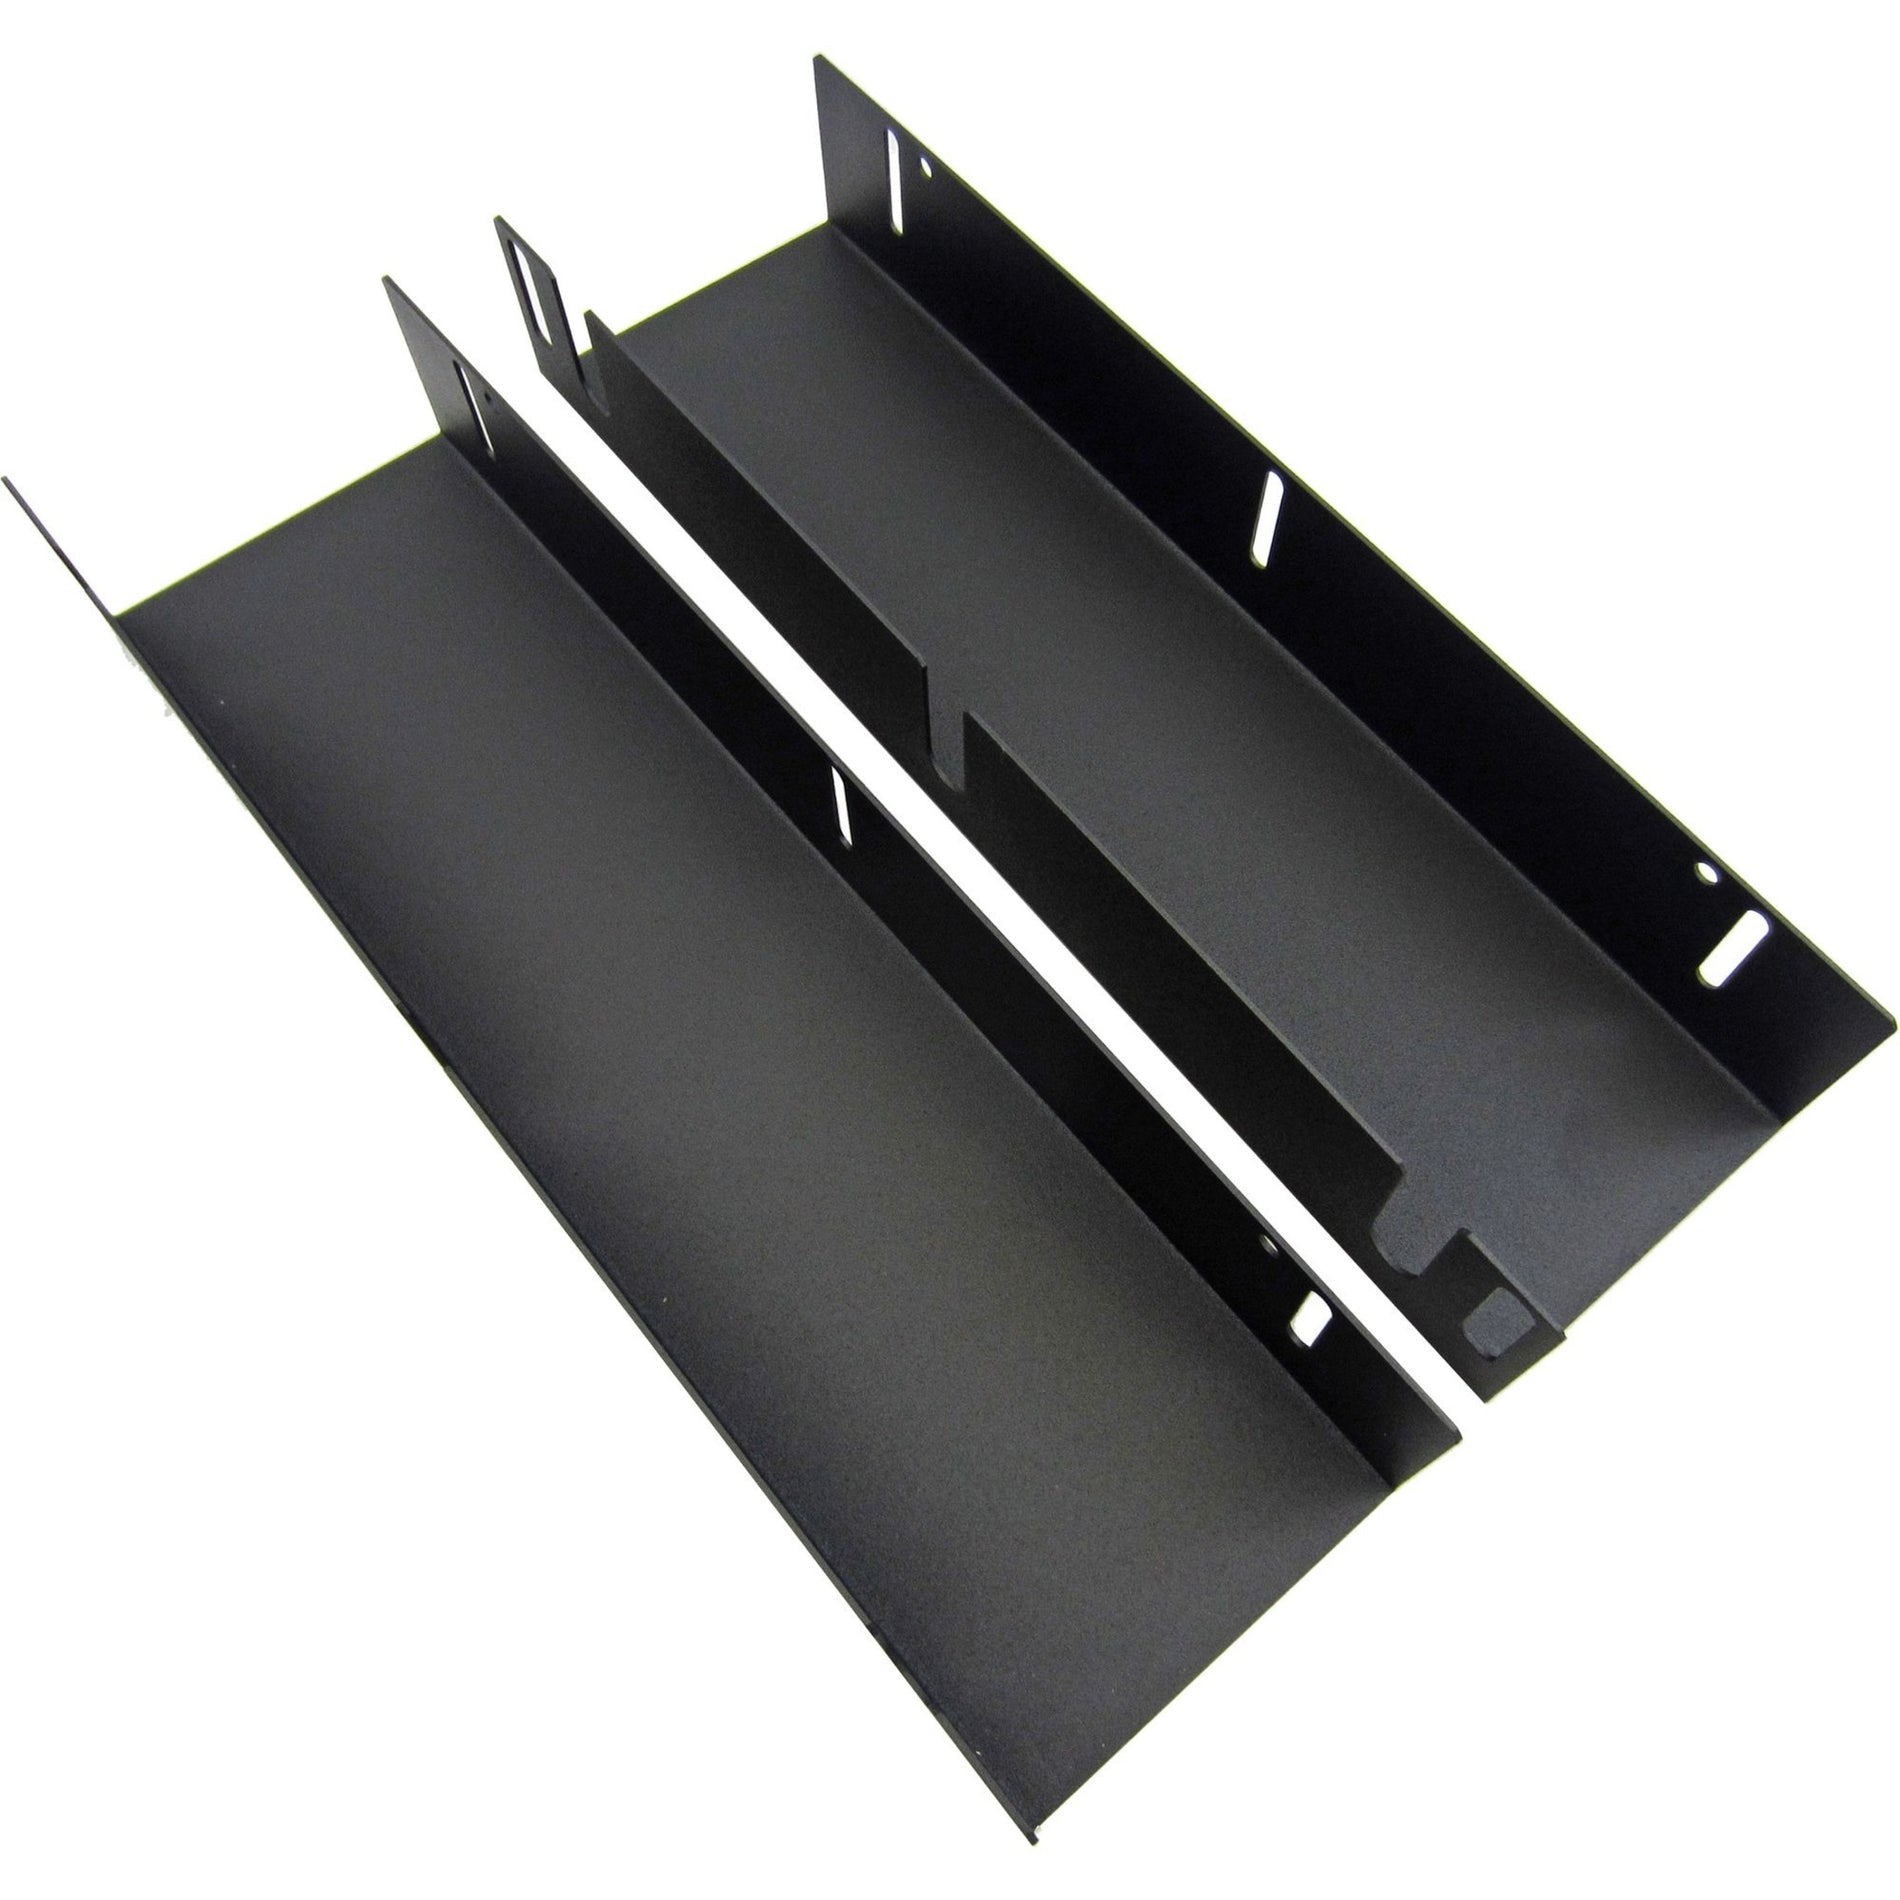 APG VPK-27B-16-BX Under Counter Mounting Bracket, Easy Installation for Cash Drawers